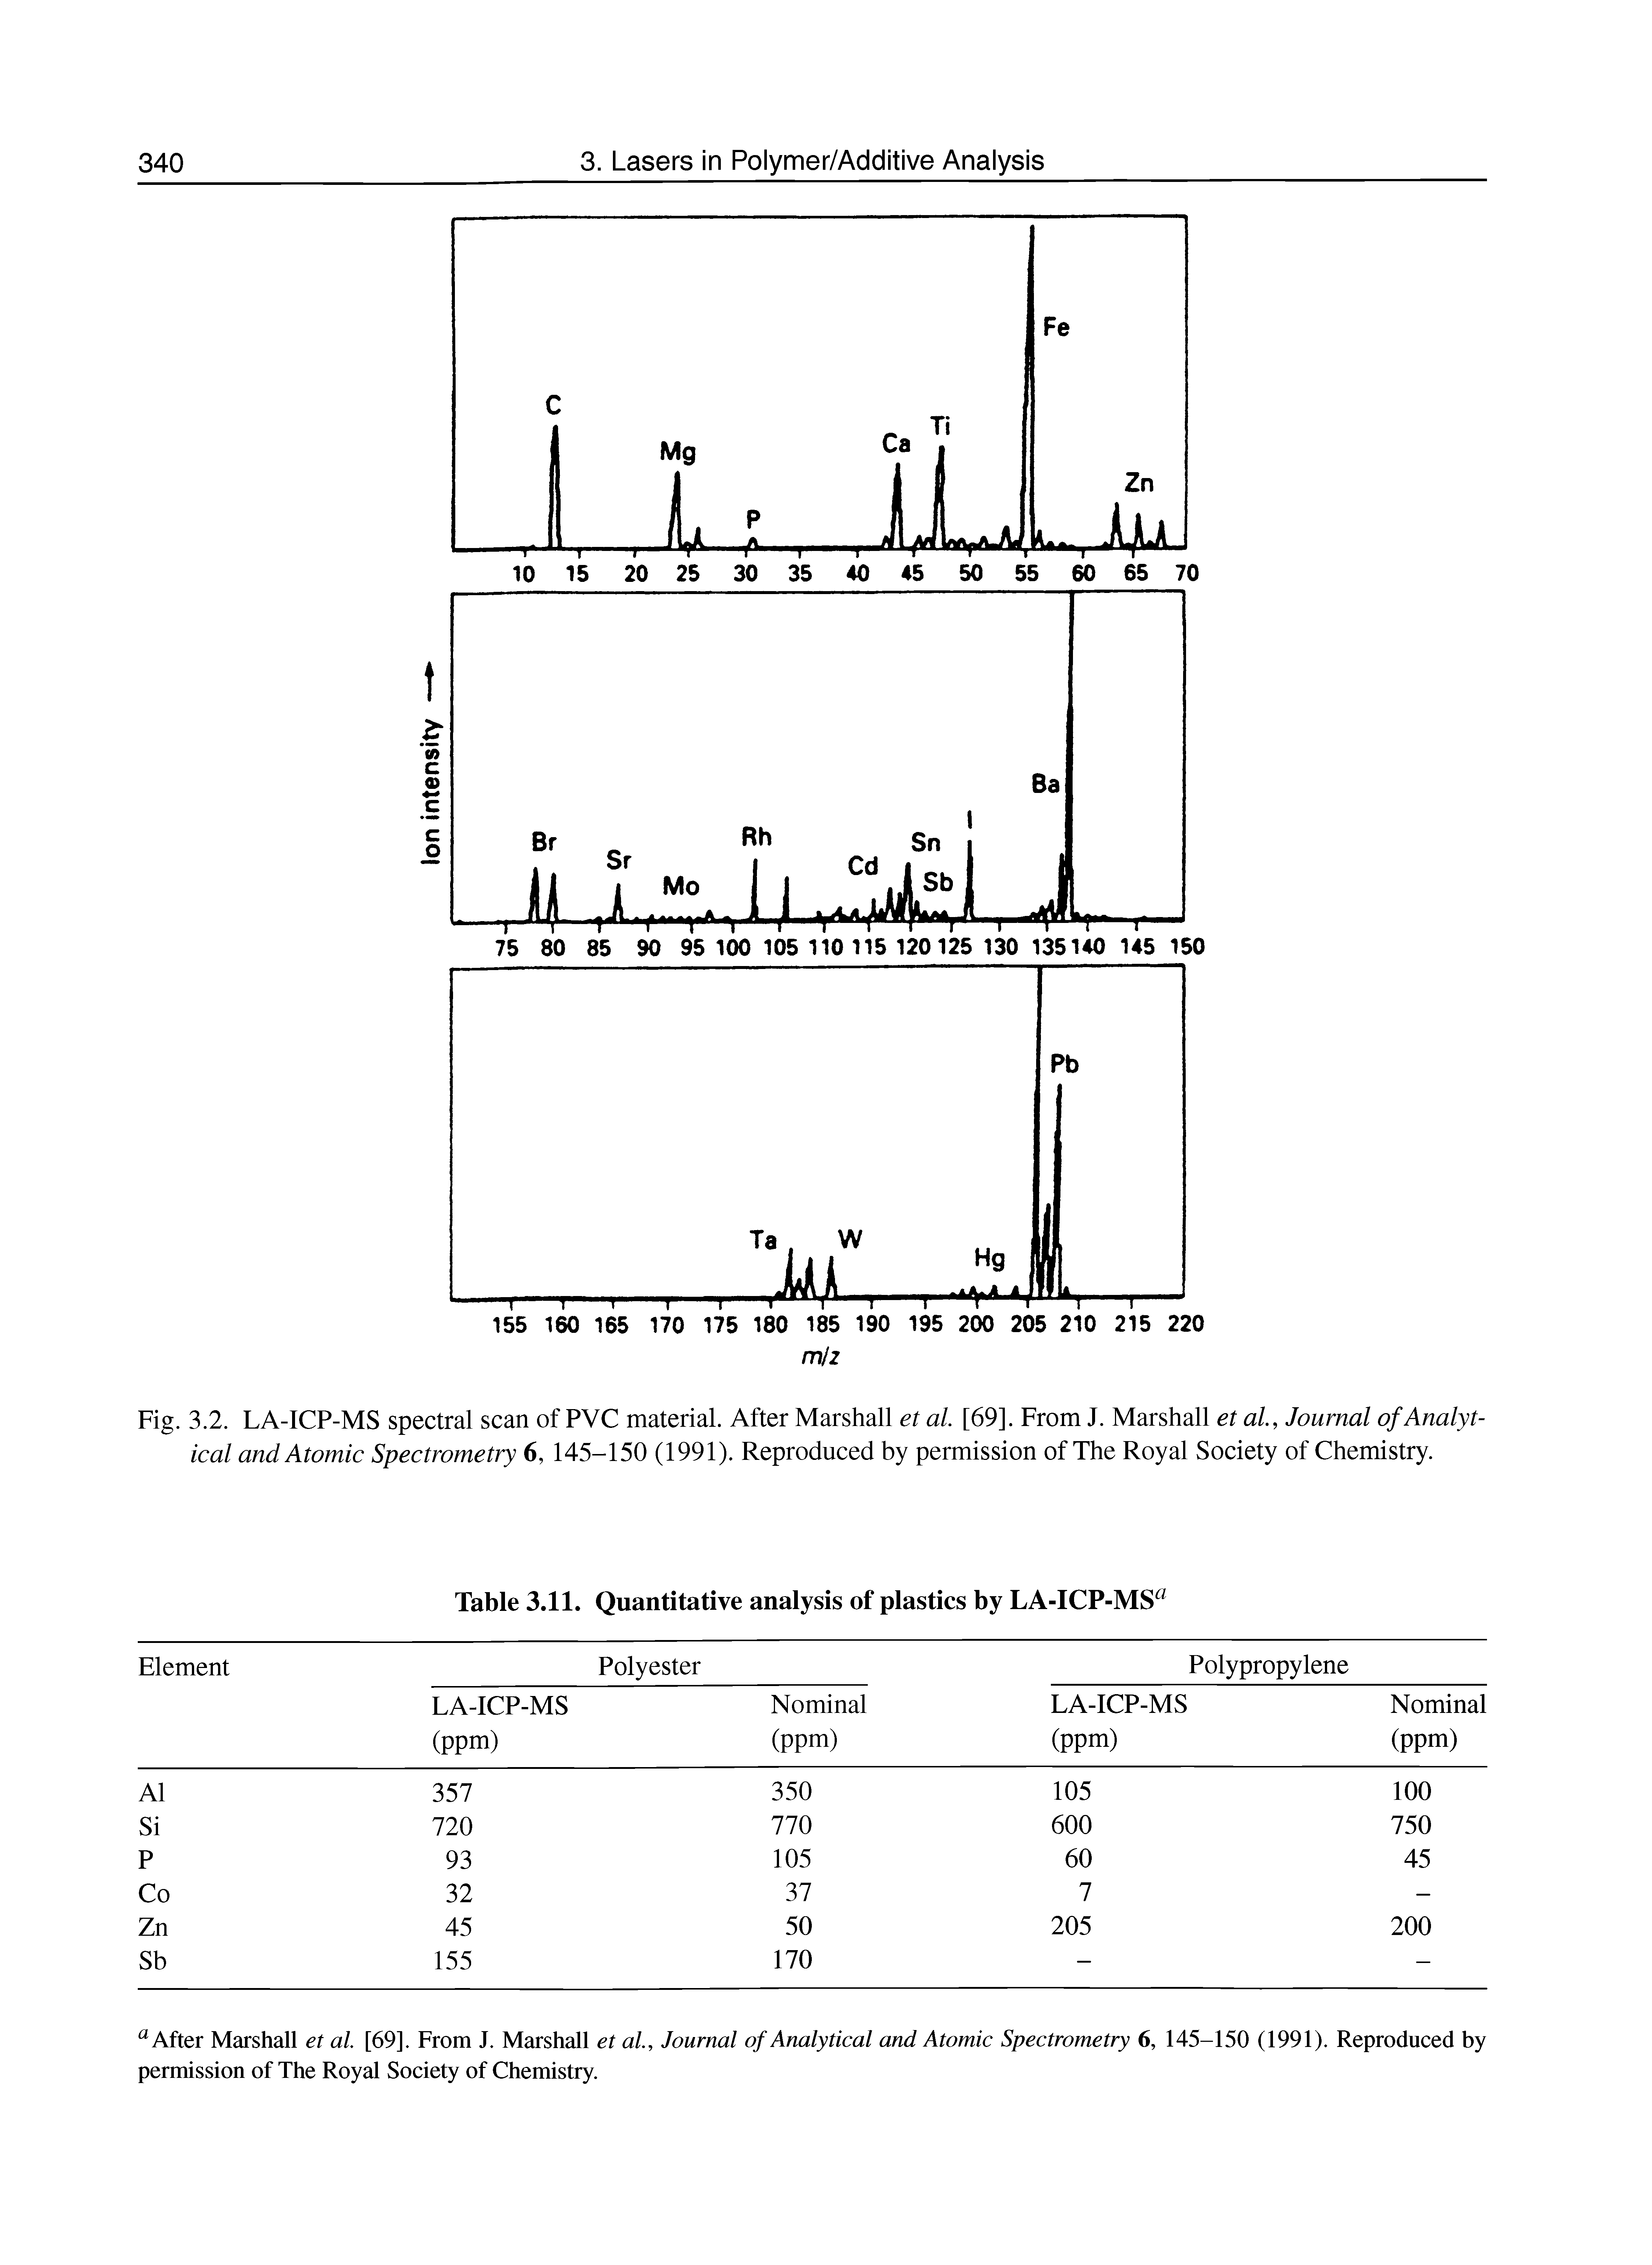 Fig. 3.2. LA-ICP-MS spectral scan of PVC material. After Marshall et al [69]. From J. Marshall et al., Journal of Analytical and Atomic Spectrometry 6, 145-150 (1991). Reproduced by permission of The Royal Society of Chemistry.